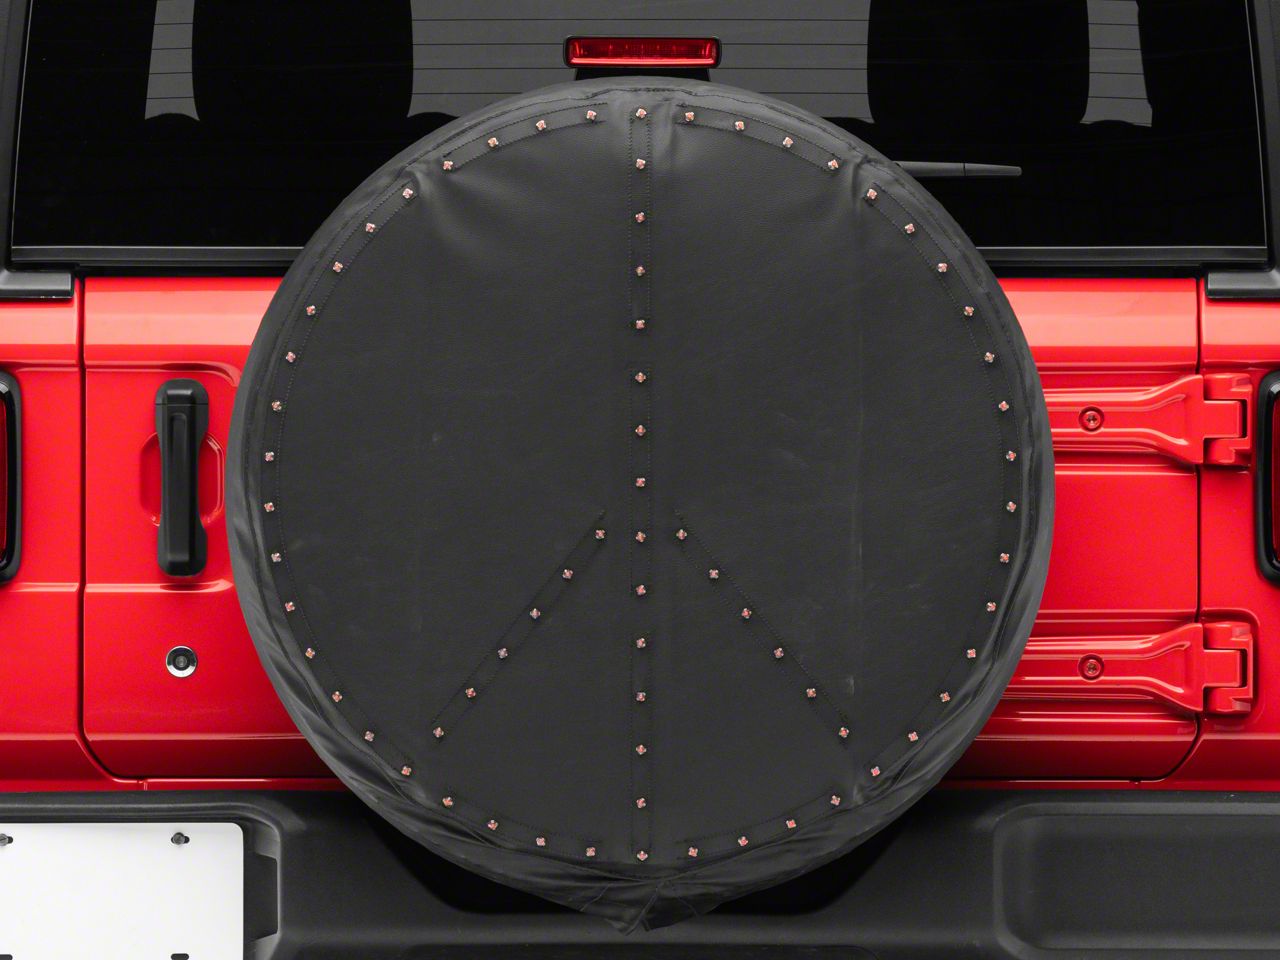 Jeep Wrangler Peace Sign LED Spare Tire Cover; Red; 30 to 32-Inch Tire Cover  (66-18 Jeep CJ5, CJ7, Wrangler YJ, TJ  JK)